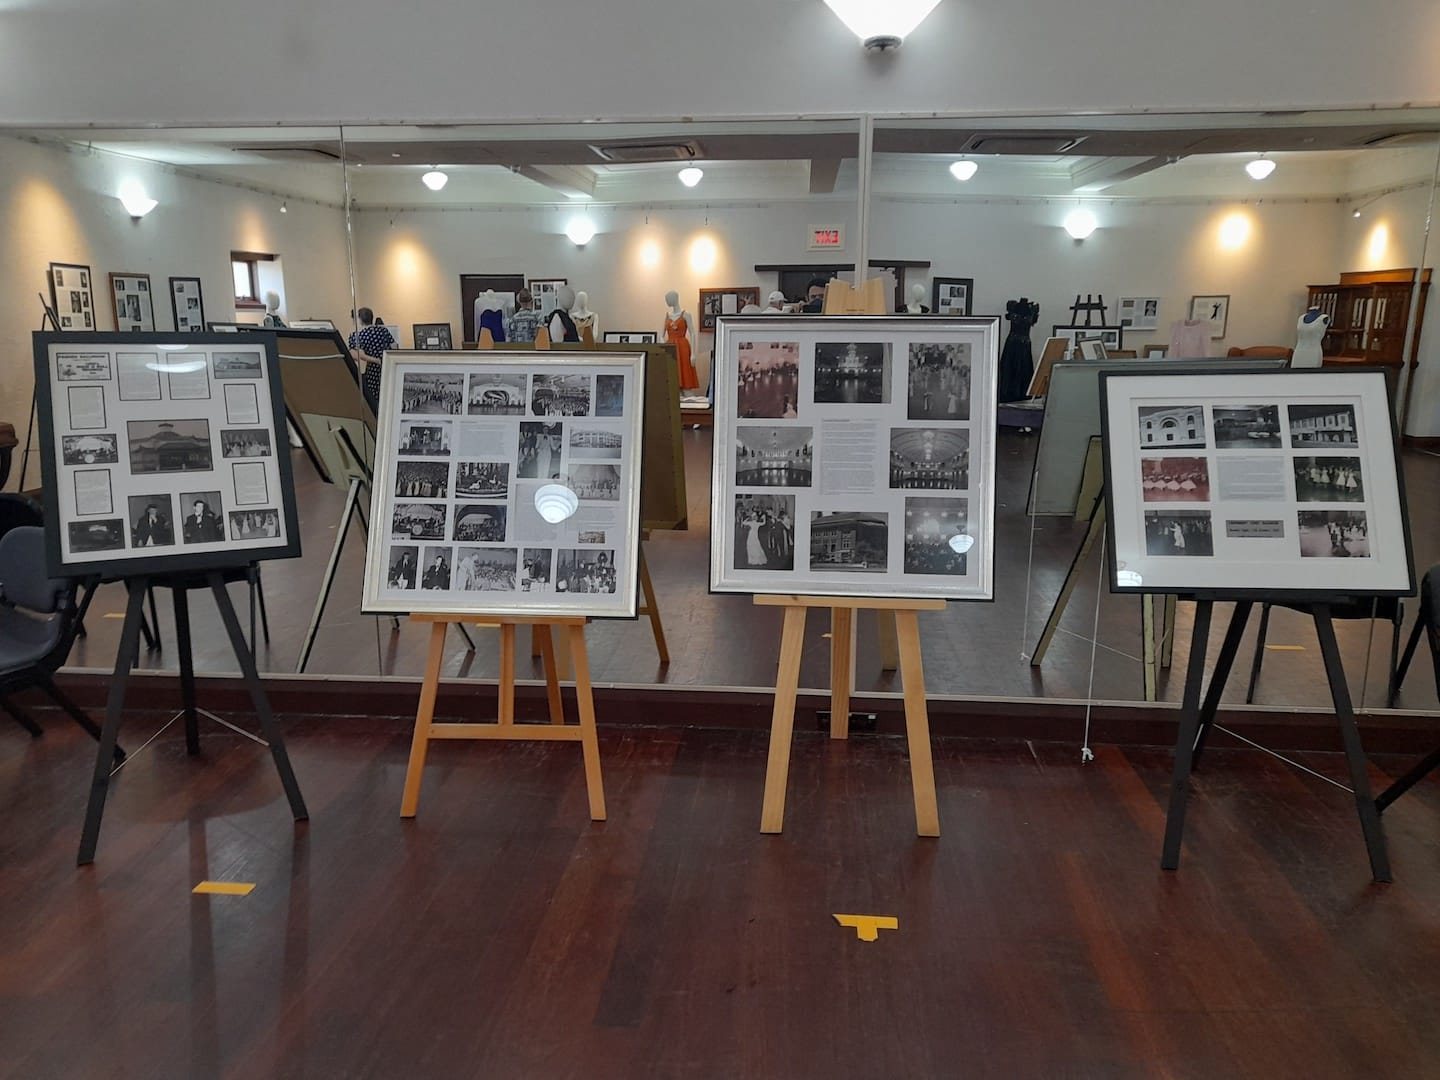 Government House Ballroom - Century of Dance is a free photographic exhibition which features 3000 photographs